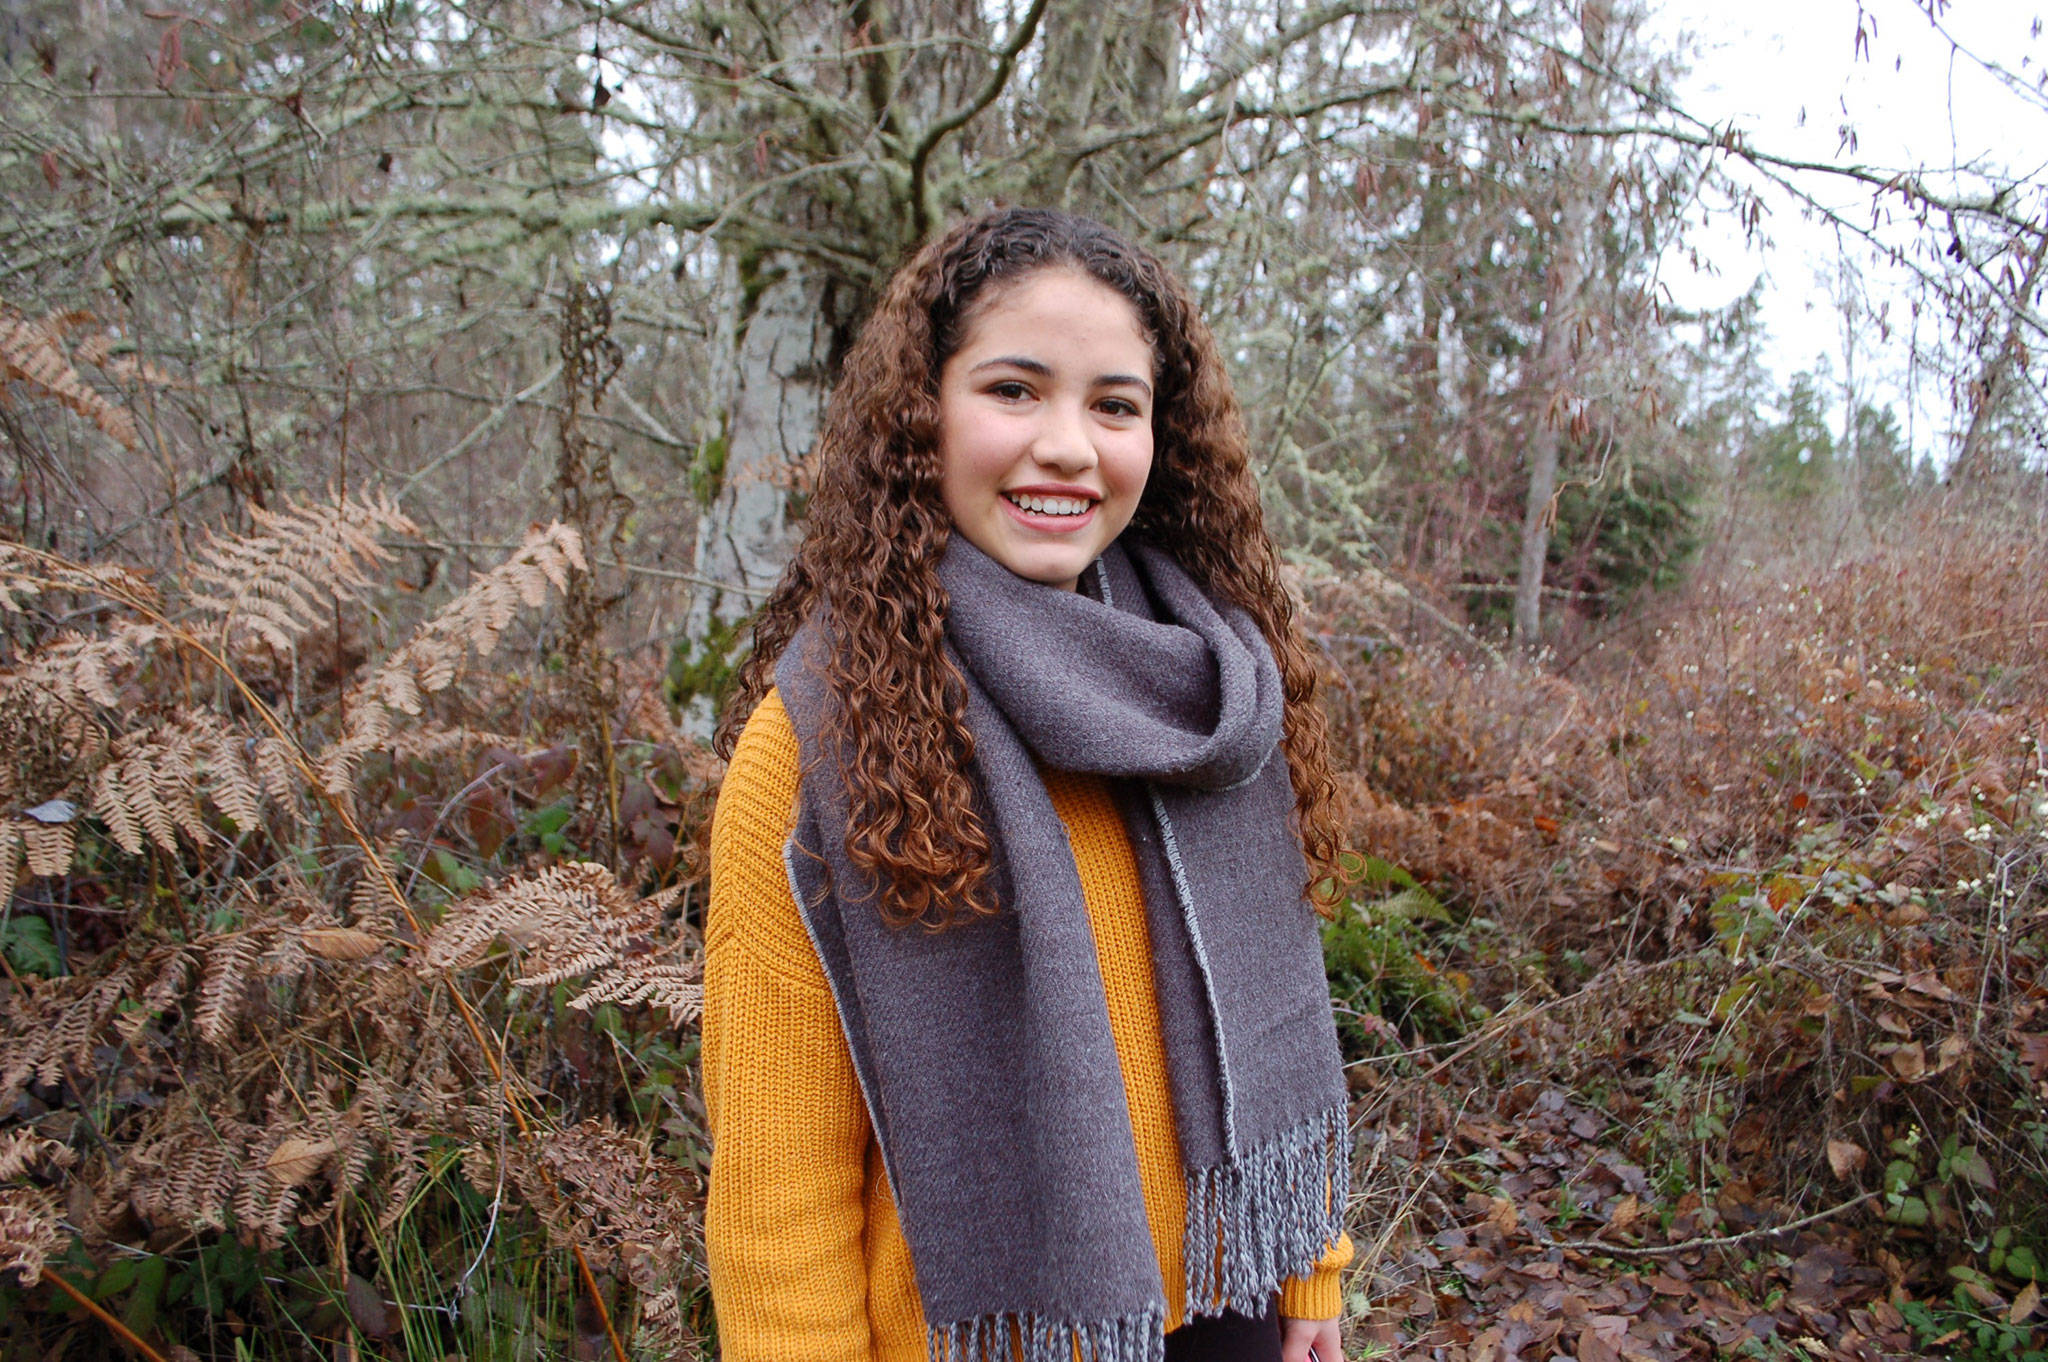 Ana Aguillon, 16, is an exchange student from Mexico and will be attending Sequim High School until June. She is living with Christine Springer and her family in Sequim. Sequim Gazette photo by Erin Hawkins